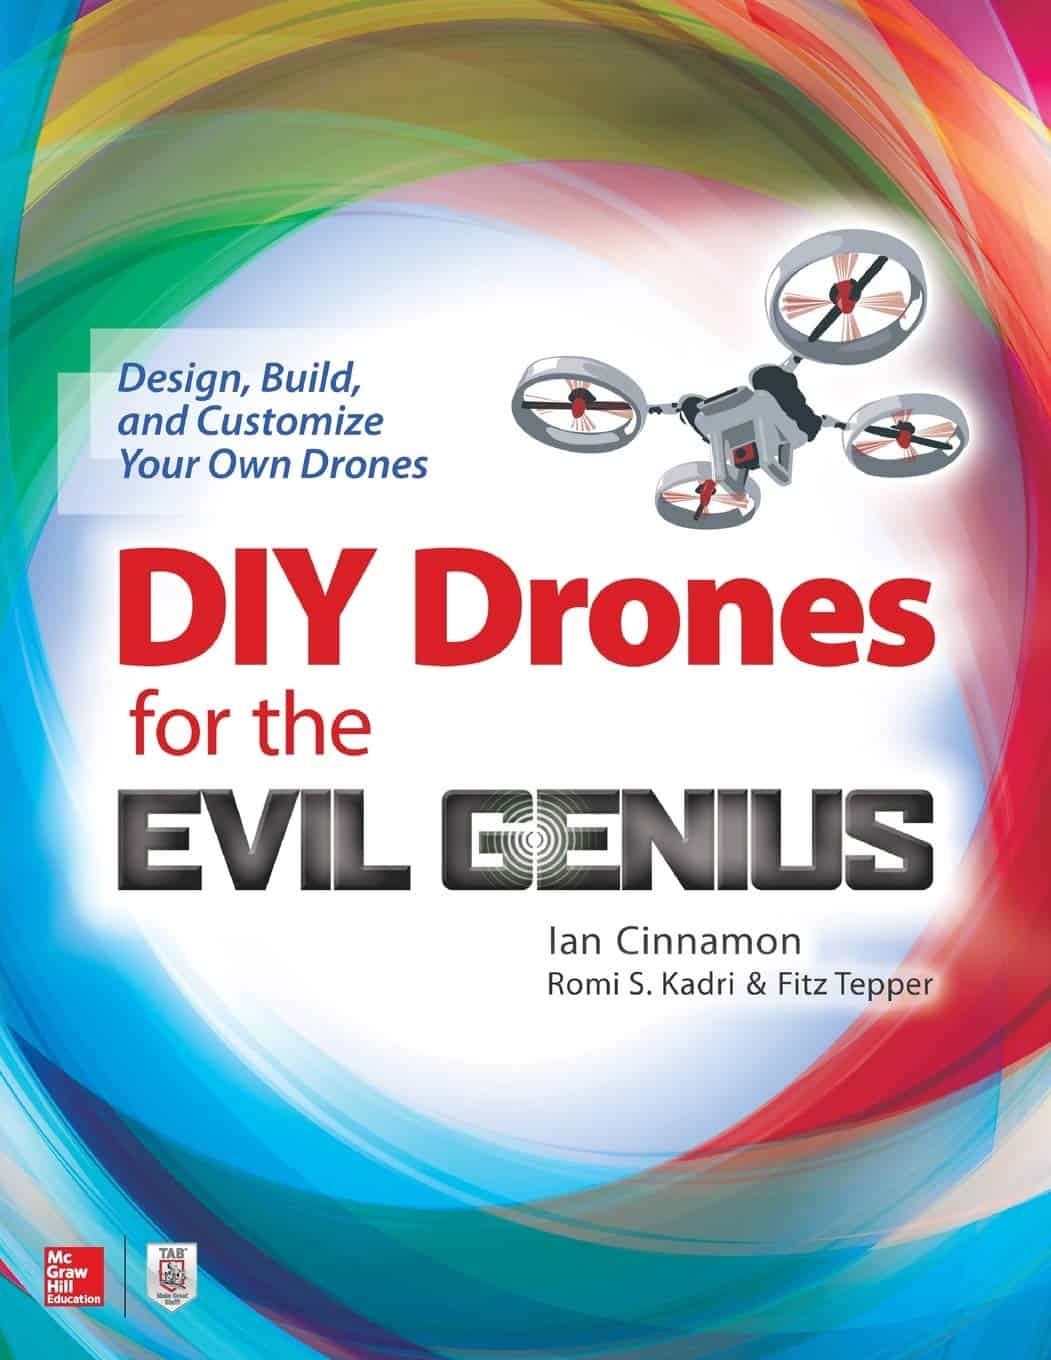 diy drones for the evil genius design, build, and customize your own drones